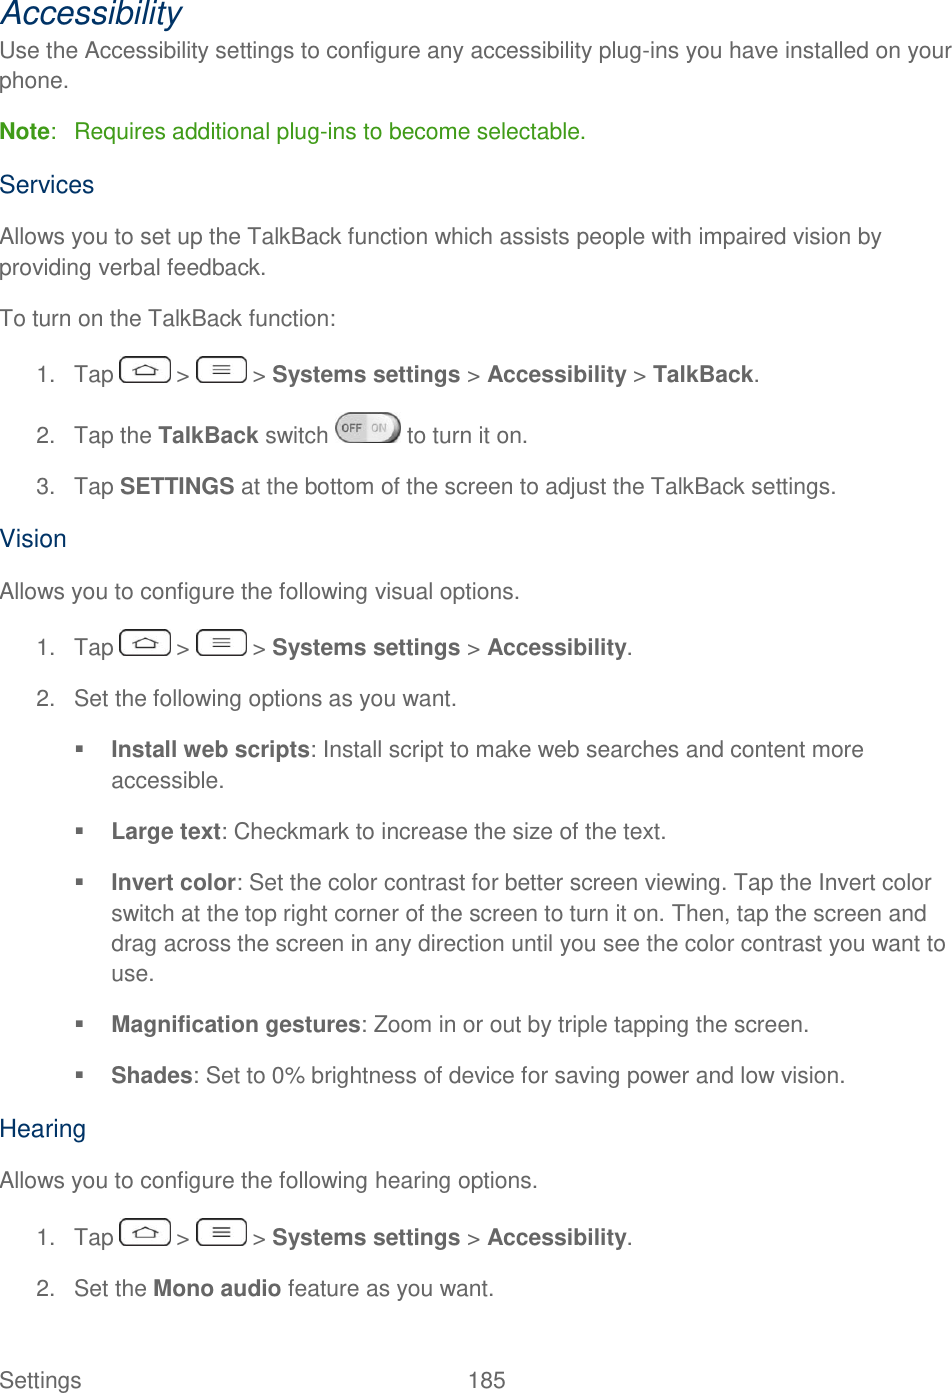  Settings  185   Accessibility Use the Accessibility settings to configure any accessibility plug-ins you have installed on your phone. Note:   Requires additional plug-ins to become selectable. Services Allows you to set up the TalkBack function which assists people with impaired vision by providing verbal feedback. To turn on the TalkBack function: 1.  Tap   &gt;   &gt; Systems settings &gt; Accessibility &gt; TalkBack. 2.  Tap the TalkBack switch   to turn it on. 3.  Tap SETTINGS at the bottom of the screen to adjust the TalkBack settings. Vision Allows you to configure the following visual options. 1.  Tap   &gt;   &gt; Systems settings &gt; Accessibility. 2.  Set the following options as you want.   Install web scripts: Install script to make web searches and content more accessible.  Large text: Checkmark to increase the size of the text.  Invert color: Set the color contrast for better screen viewing. Tap the Invert color switch at the top right corner of the screen to turn it on. Then, tap the screen and drag across the screen in any direction until you see the color contrast you want to use.  Magnification gestures: Zoom in or out by triple tapping the screen.  Shades: Set to 0% brightness of device for saving power and low vision. Hearing Allows you to configure the following hearing options. 1.  Tap   &gt;   &gt; Systems settings &gt; Accessibility. 2.  Set the Mono audio feature as you want.  